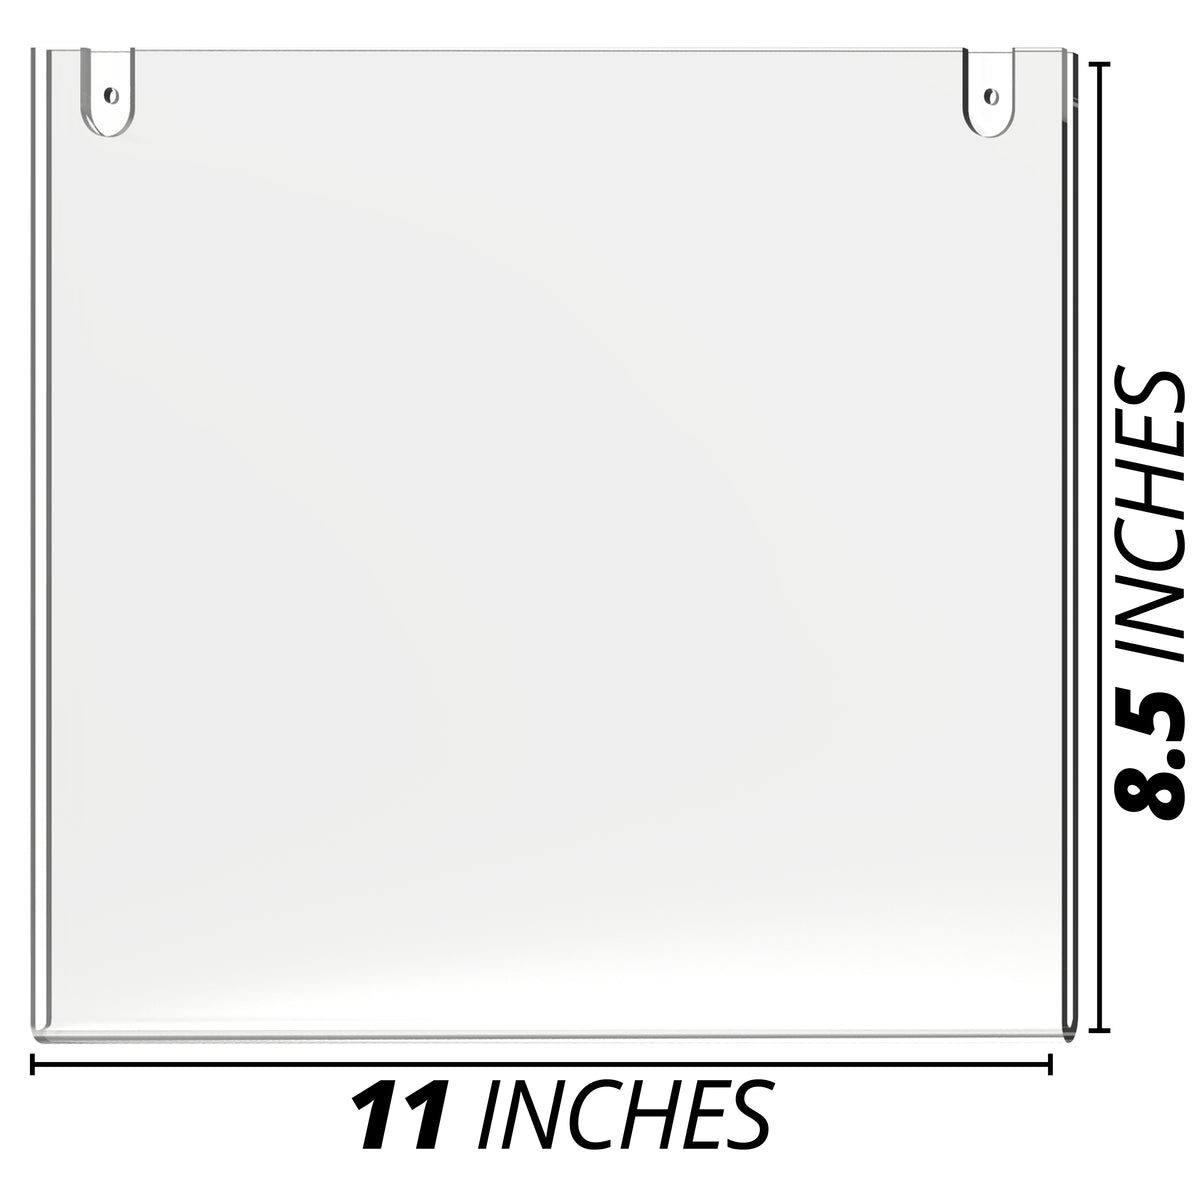 Acrylic Wall Mount Frame for US Letter Size (8.5"x11") Paper